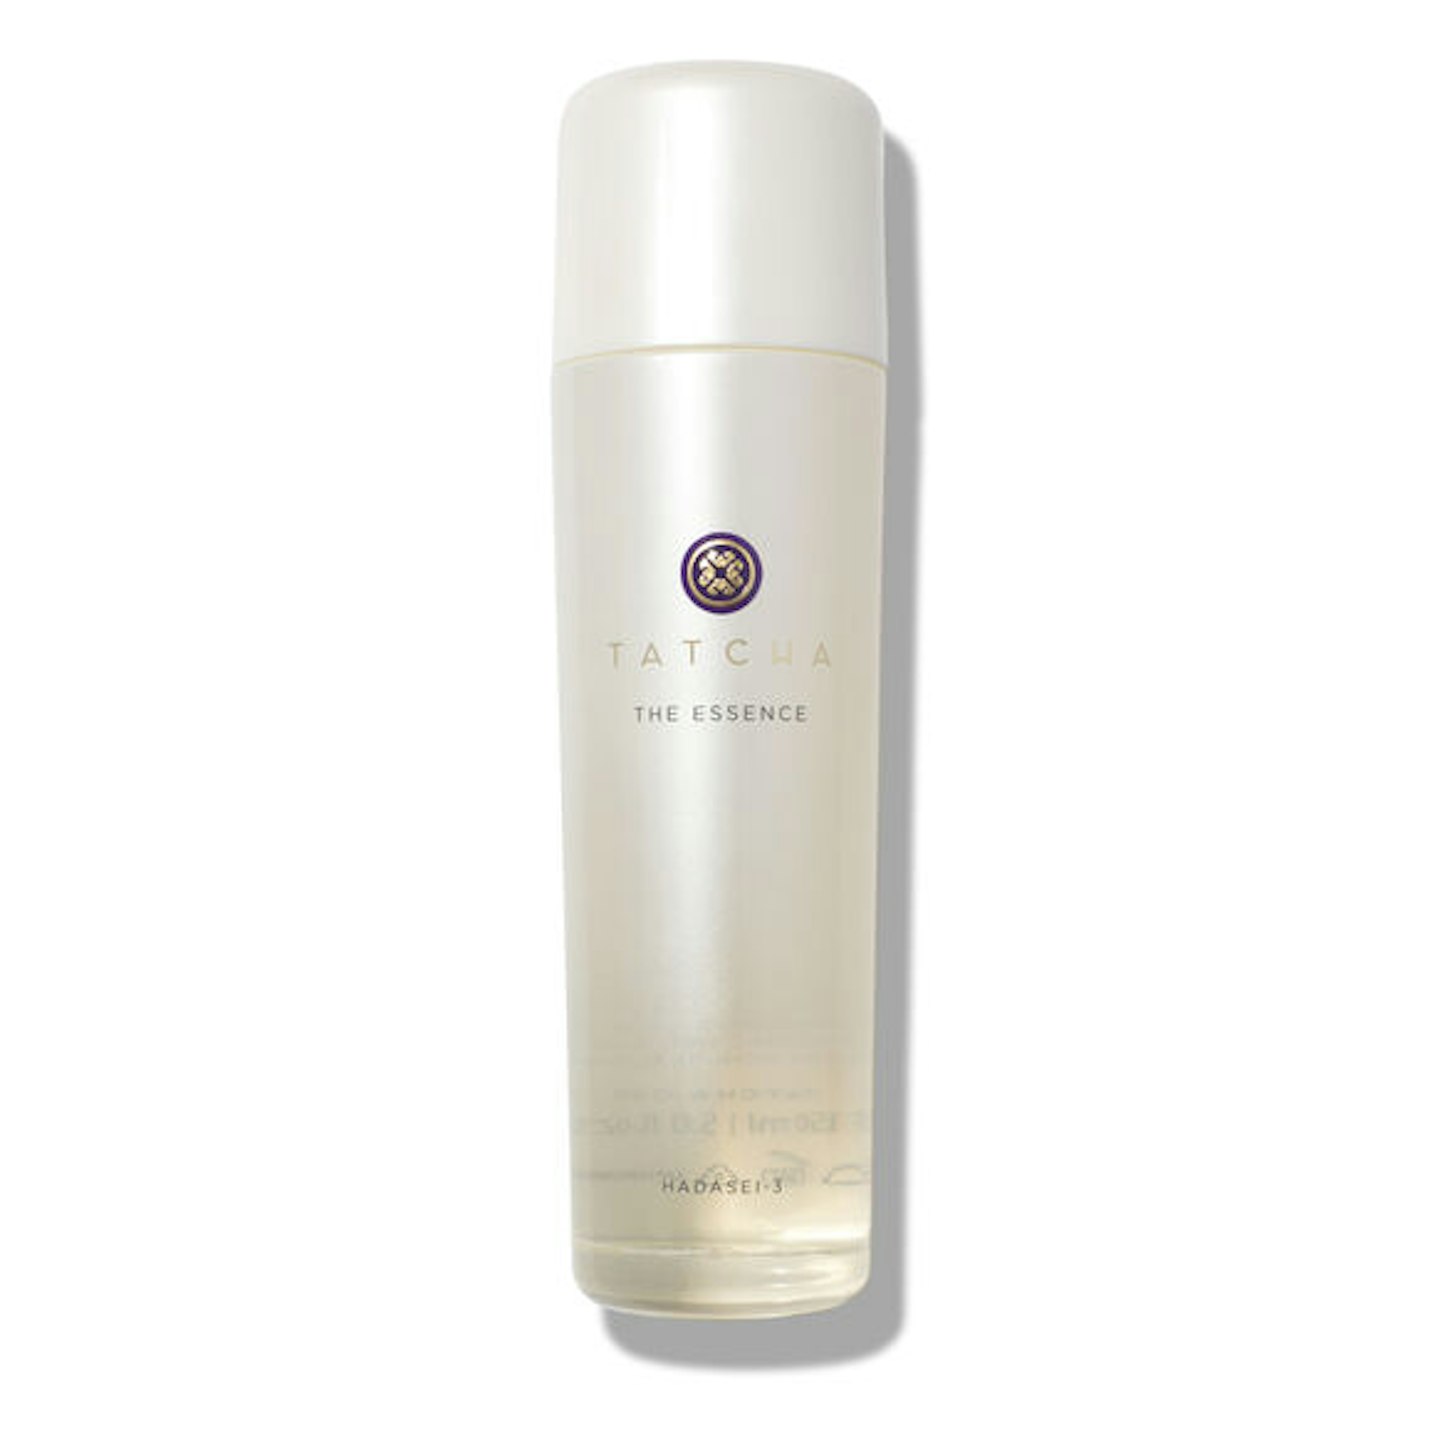 An Honest Review Of Tatcha, The Skincare Brand A-Listers Love